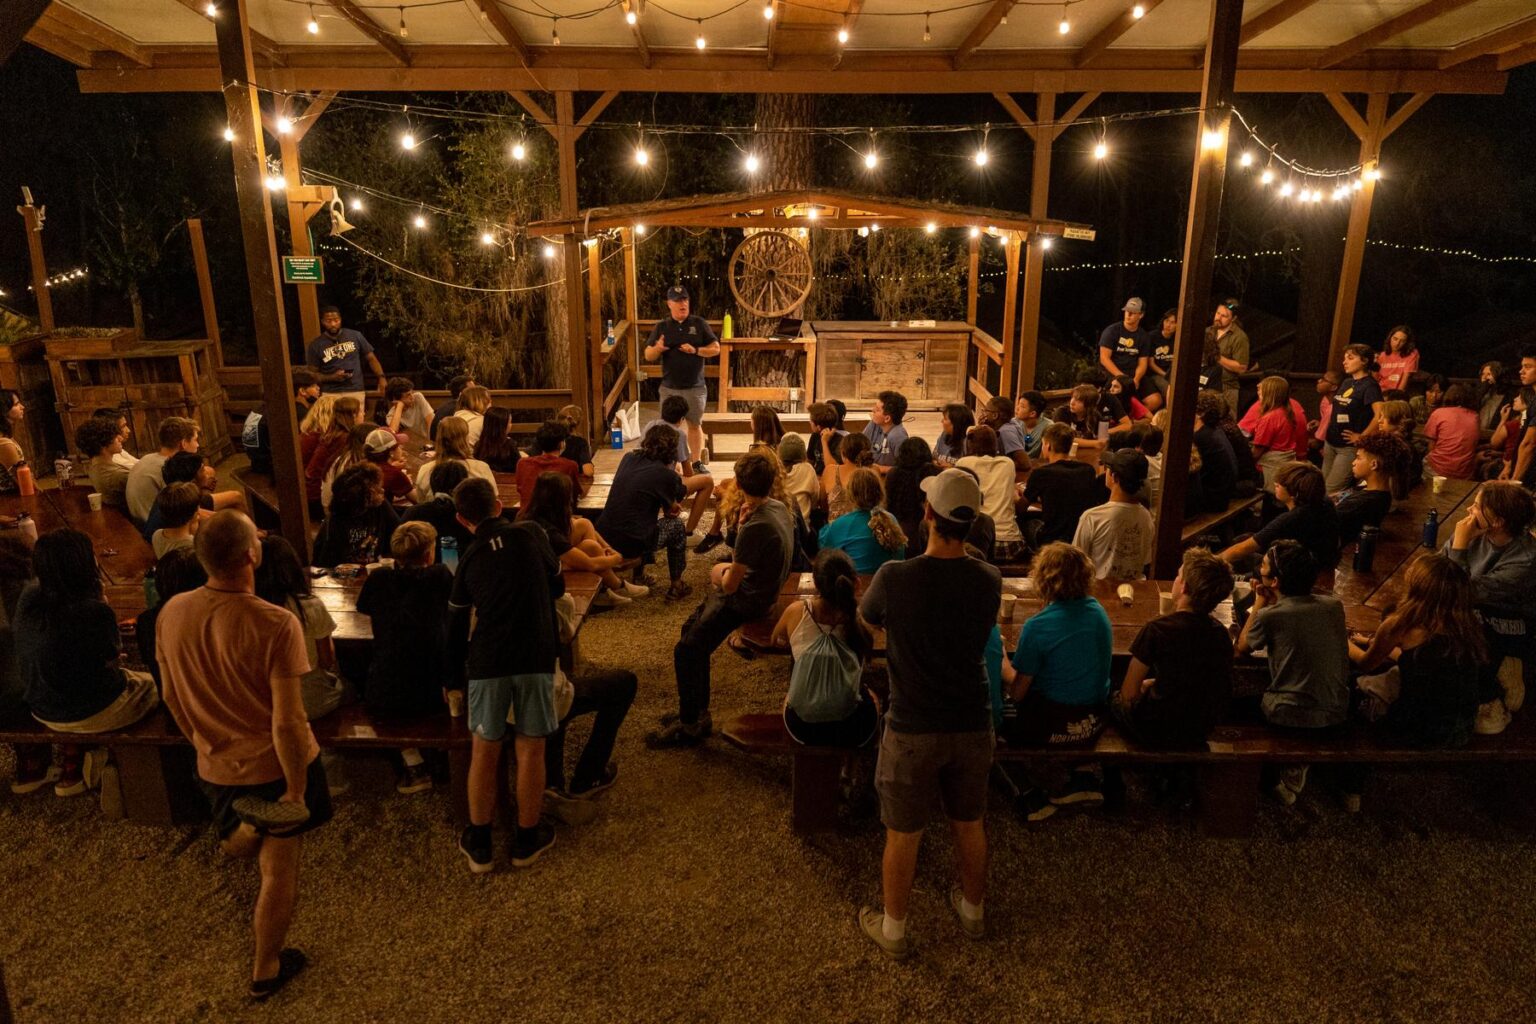 A large group of people sat around picnic tables listening to a man speaking on a small stage at night with string lights illuminating the scene.